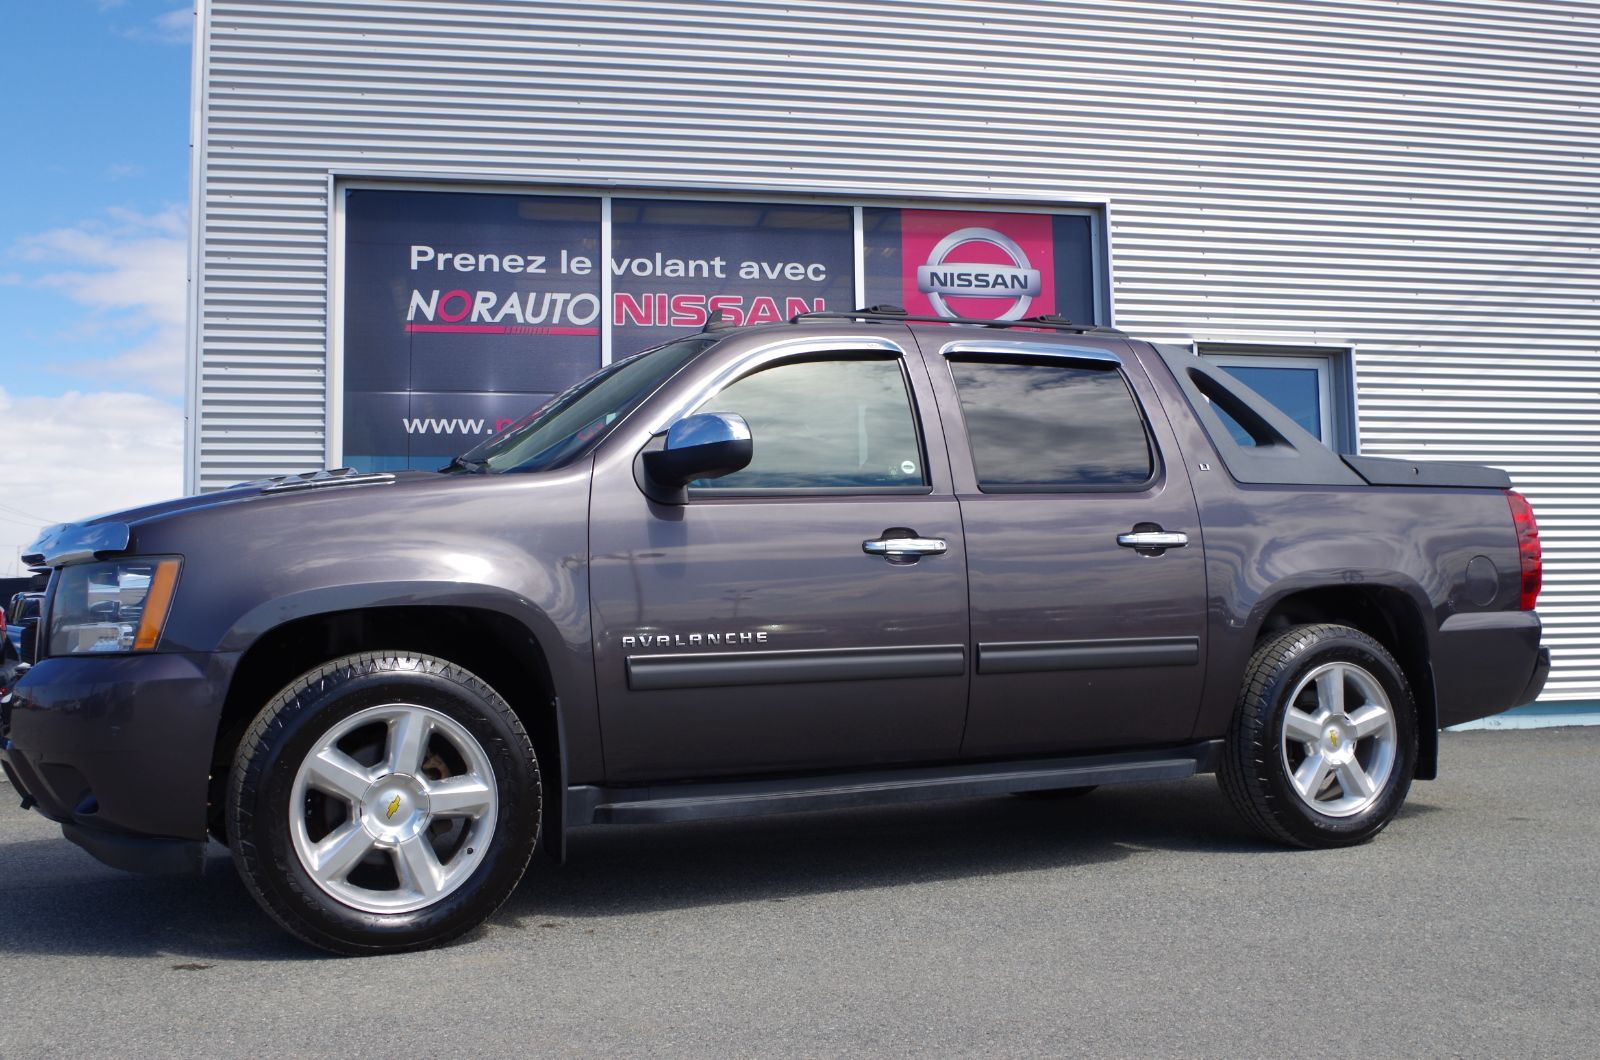 Used 2010 Chevrolet Avalanche Lt 4wd 5 3l In Amos Used Inventory Norauto Nissan In Amos Quebec